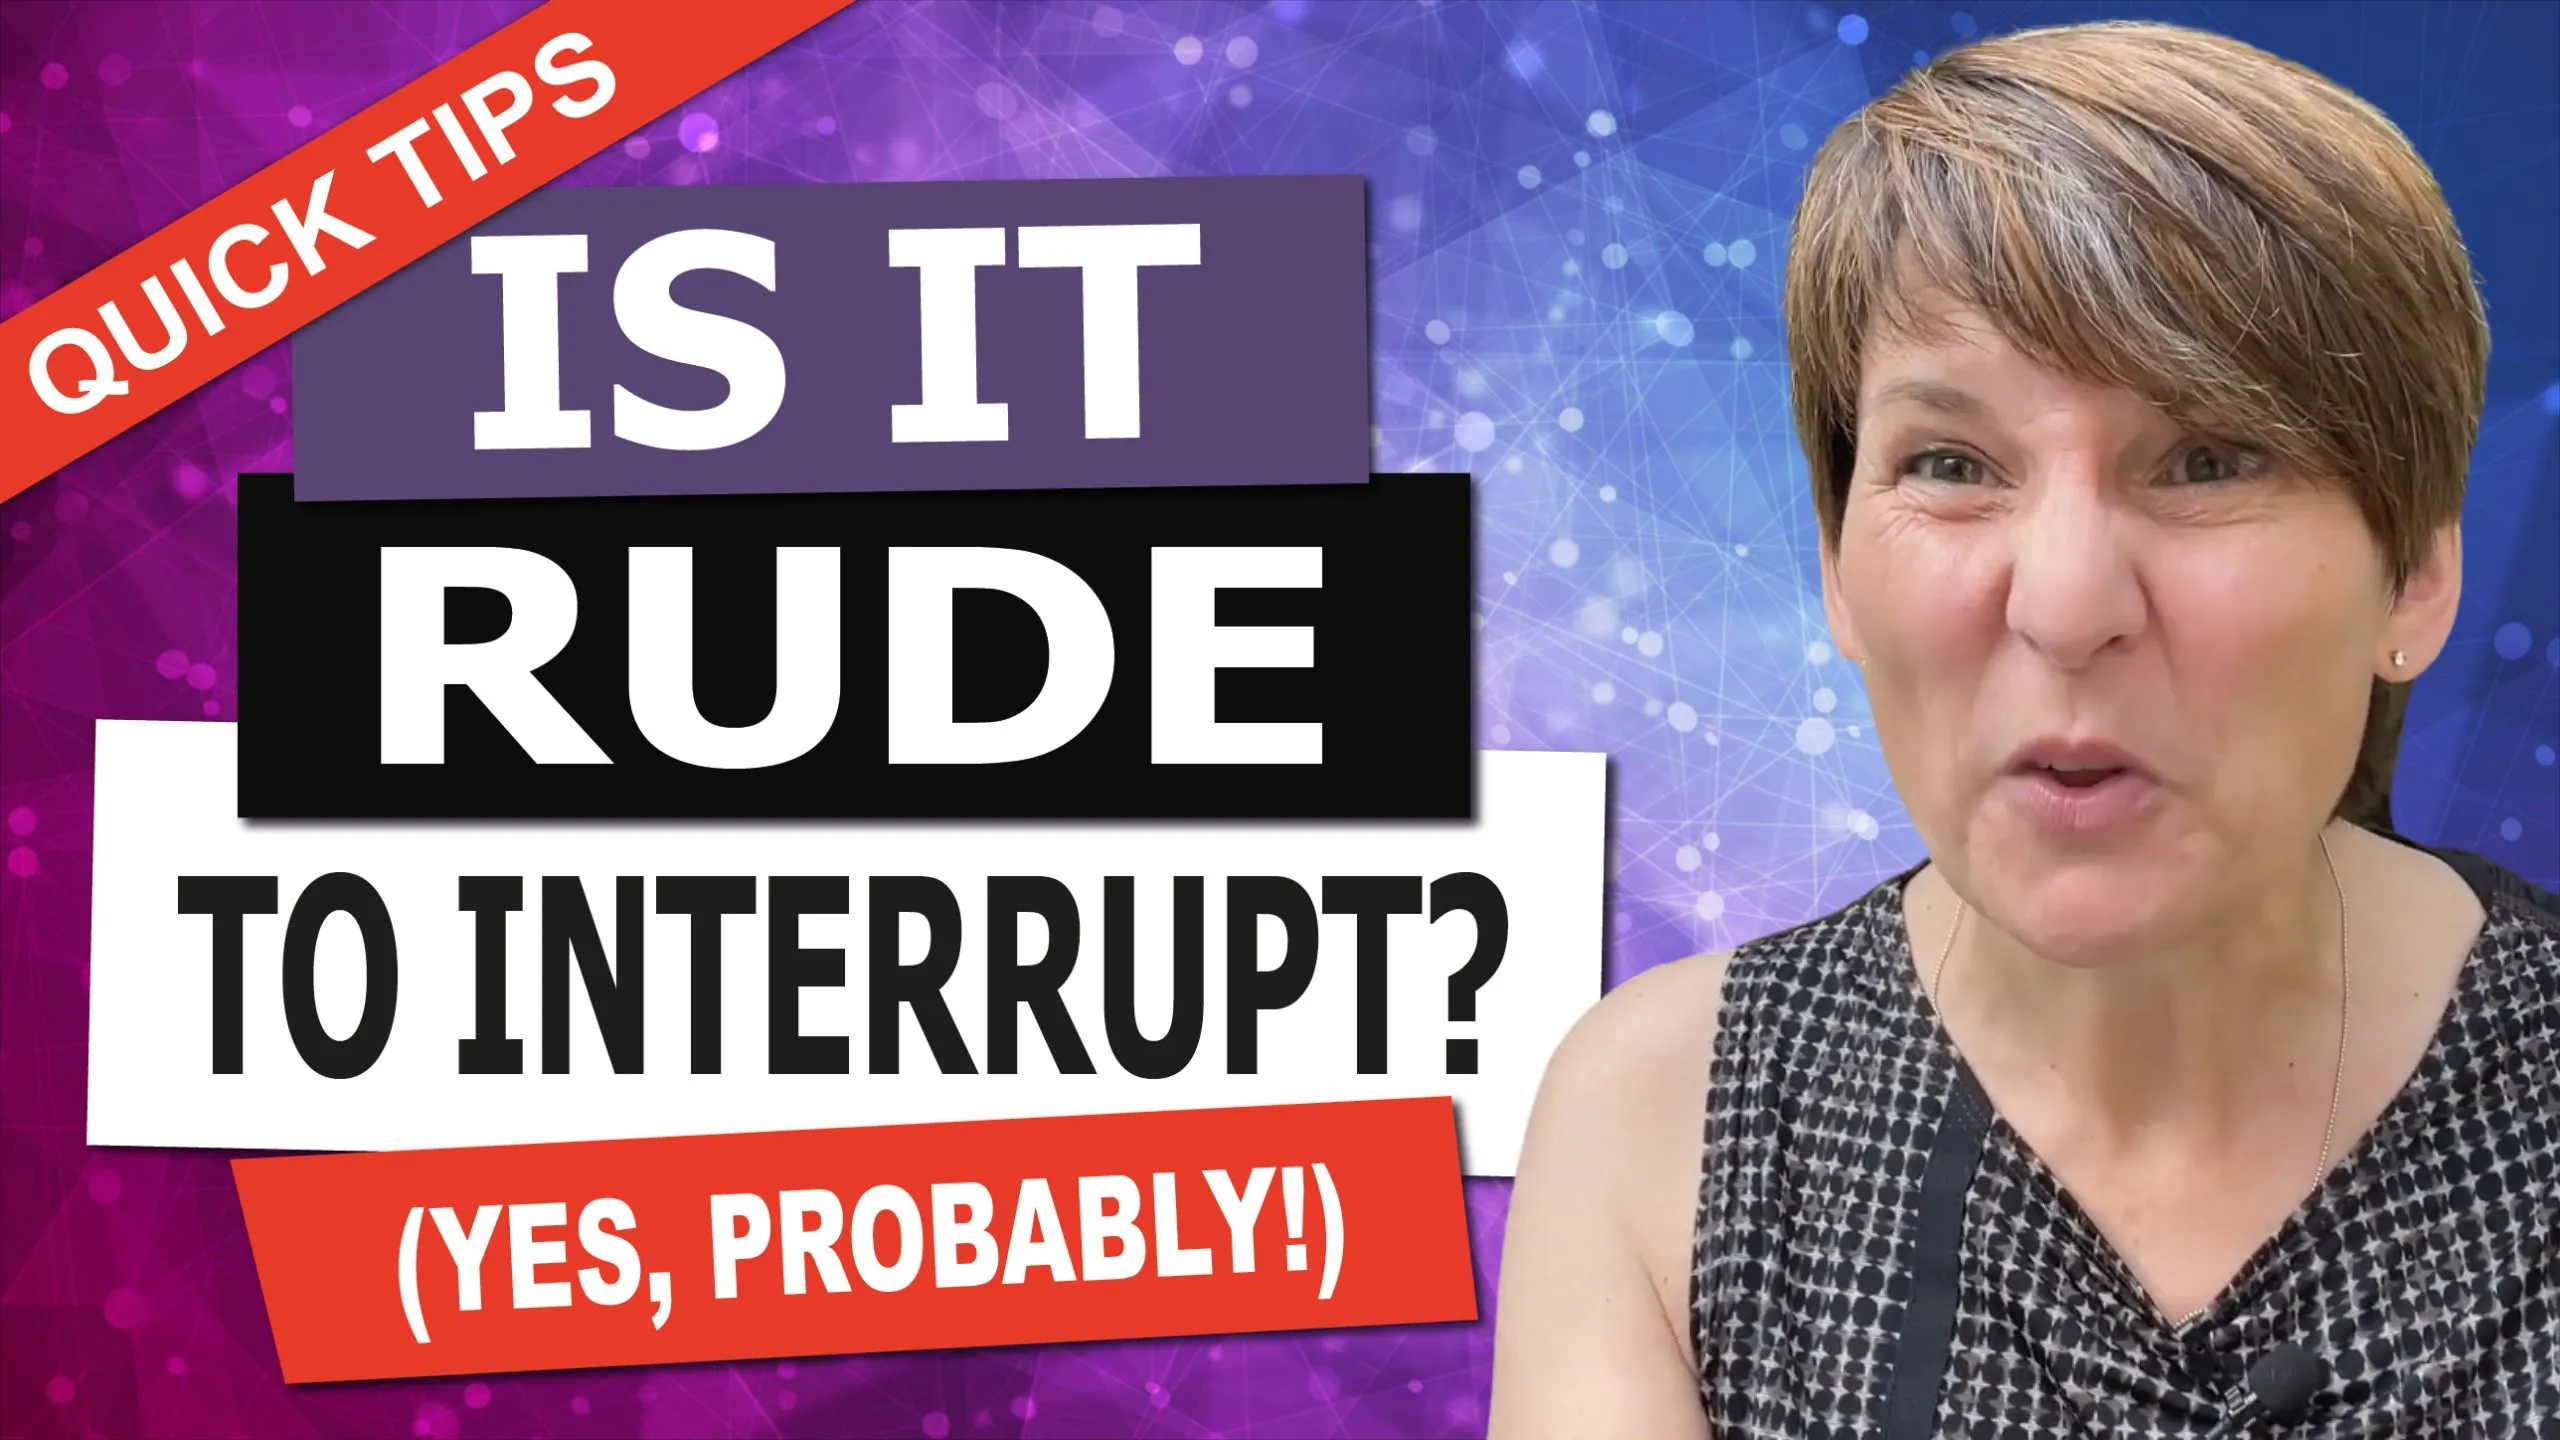 Is it Rude to Interrupt? Yes, Probably! with Liane Davey